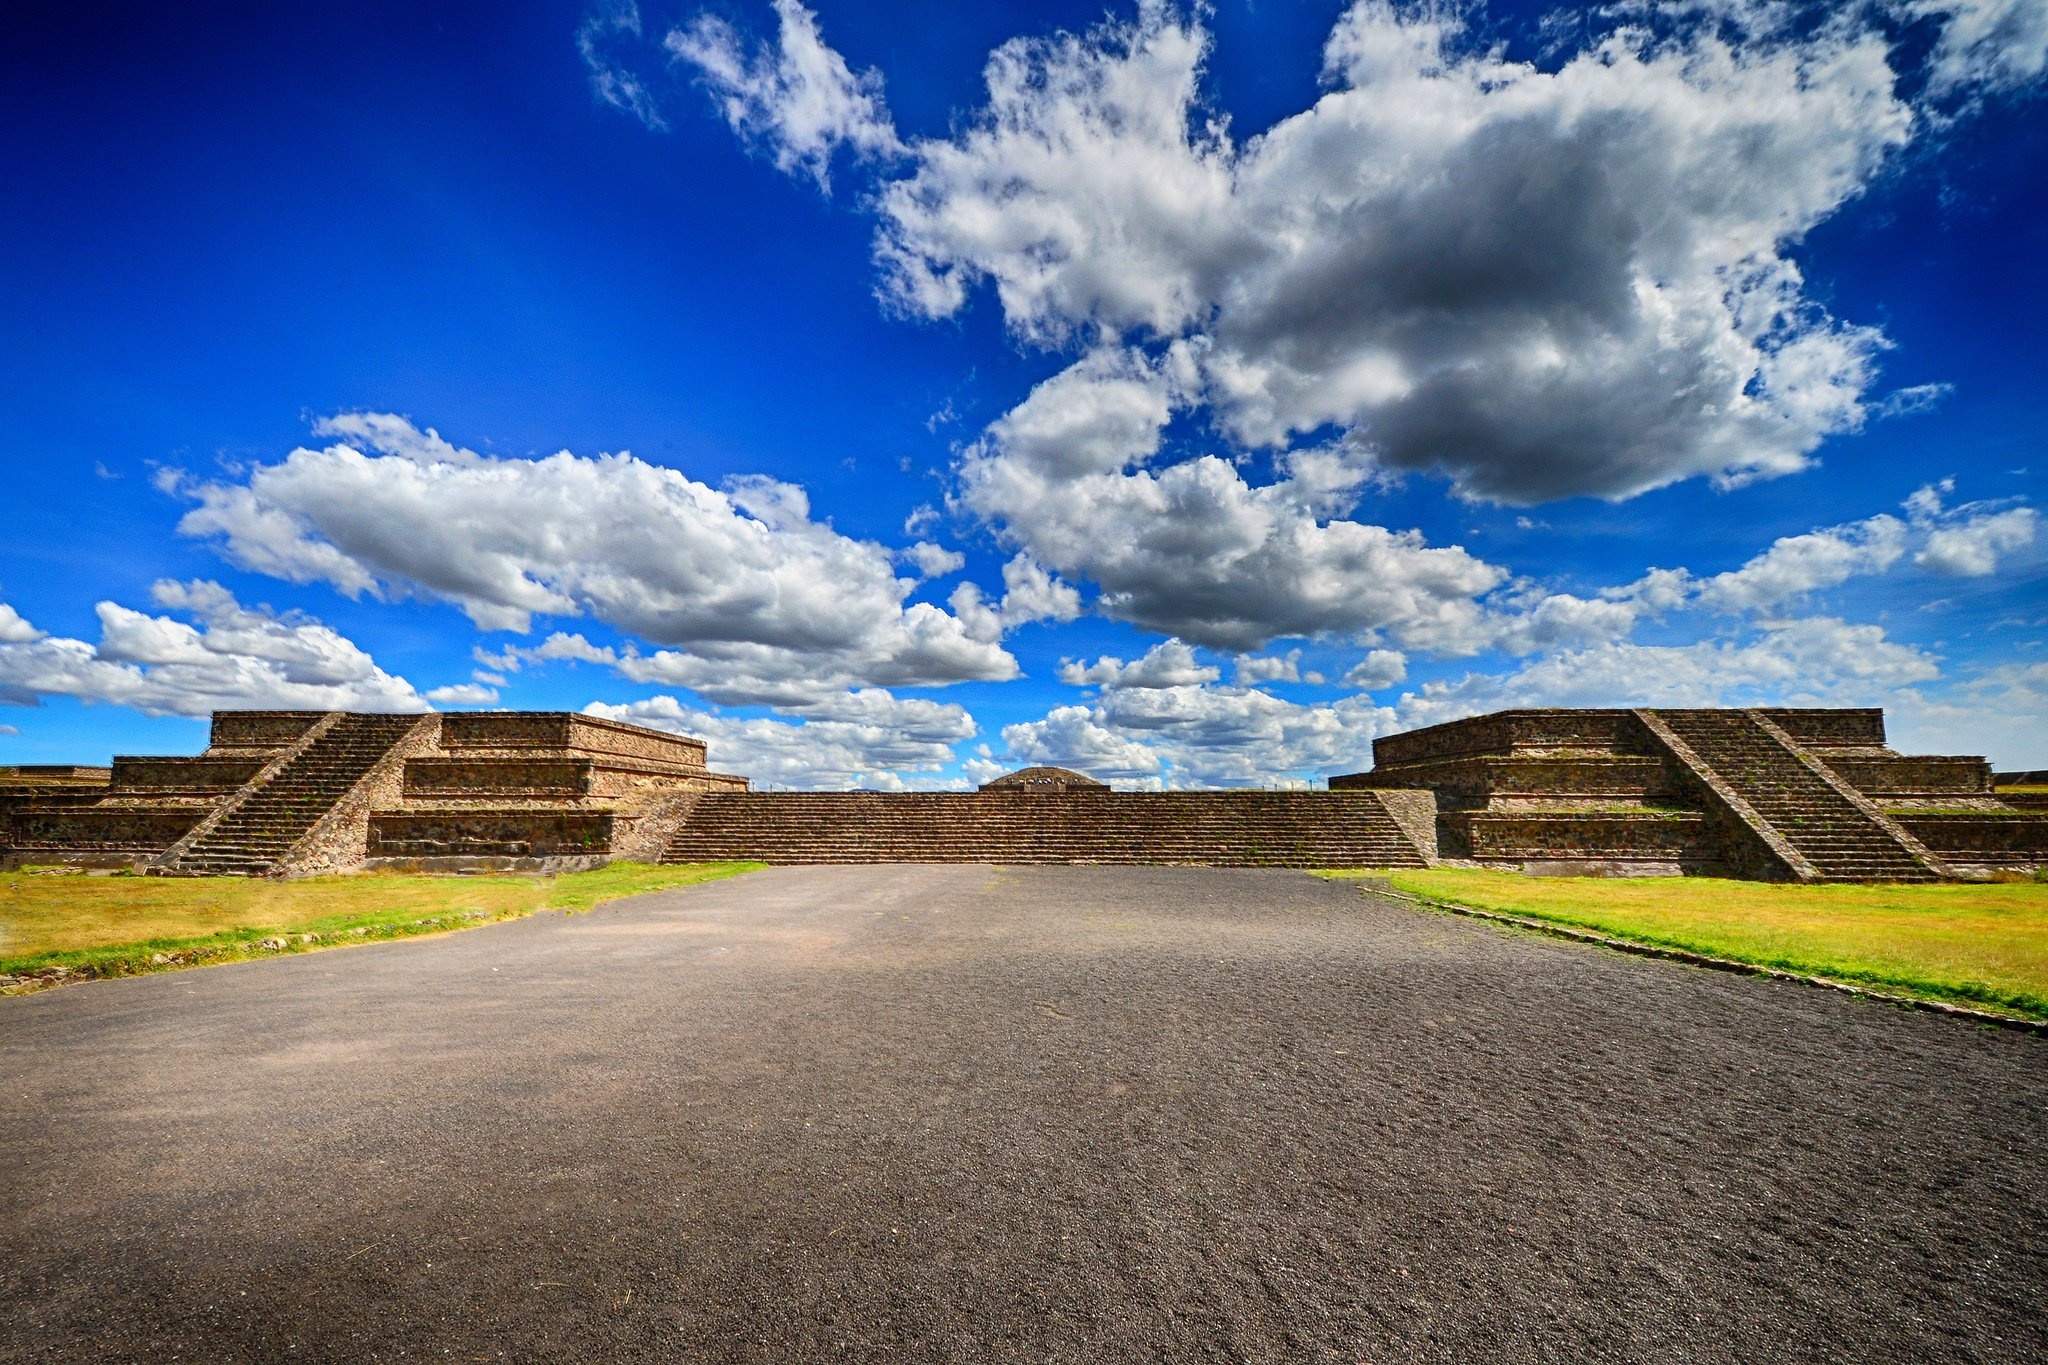 Teotihuacan cities, Mexico sky, Travel adventures, Cloud formations, 2050x1370 HD Desktop